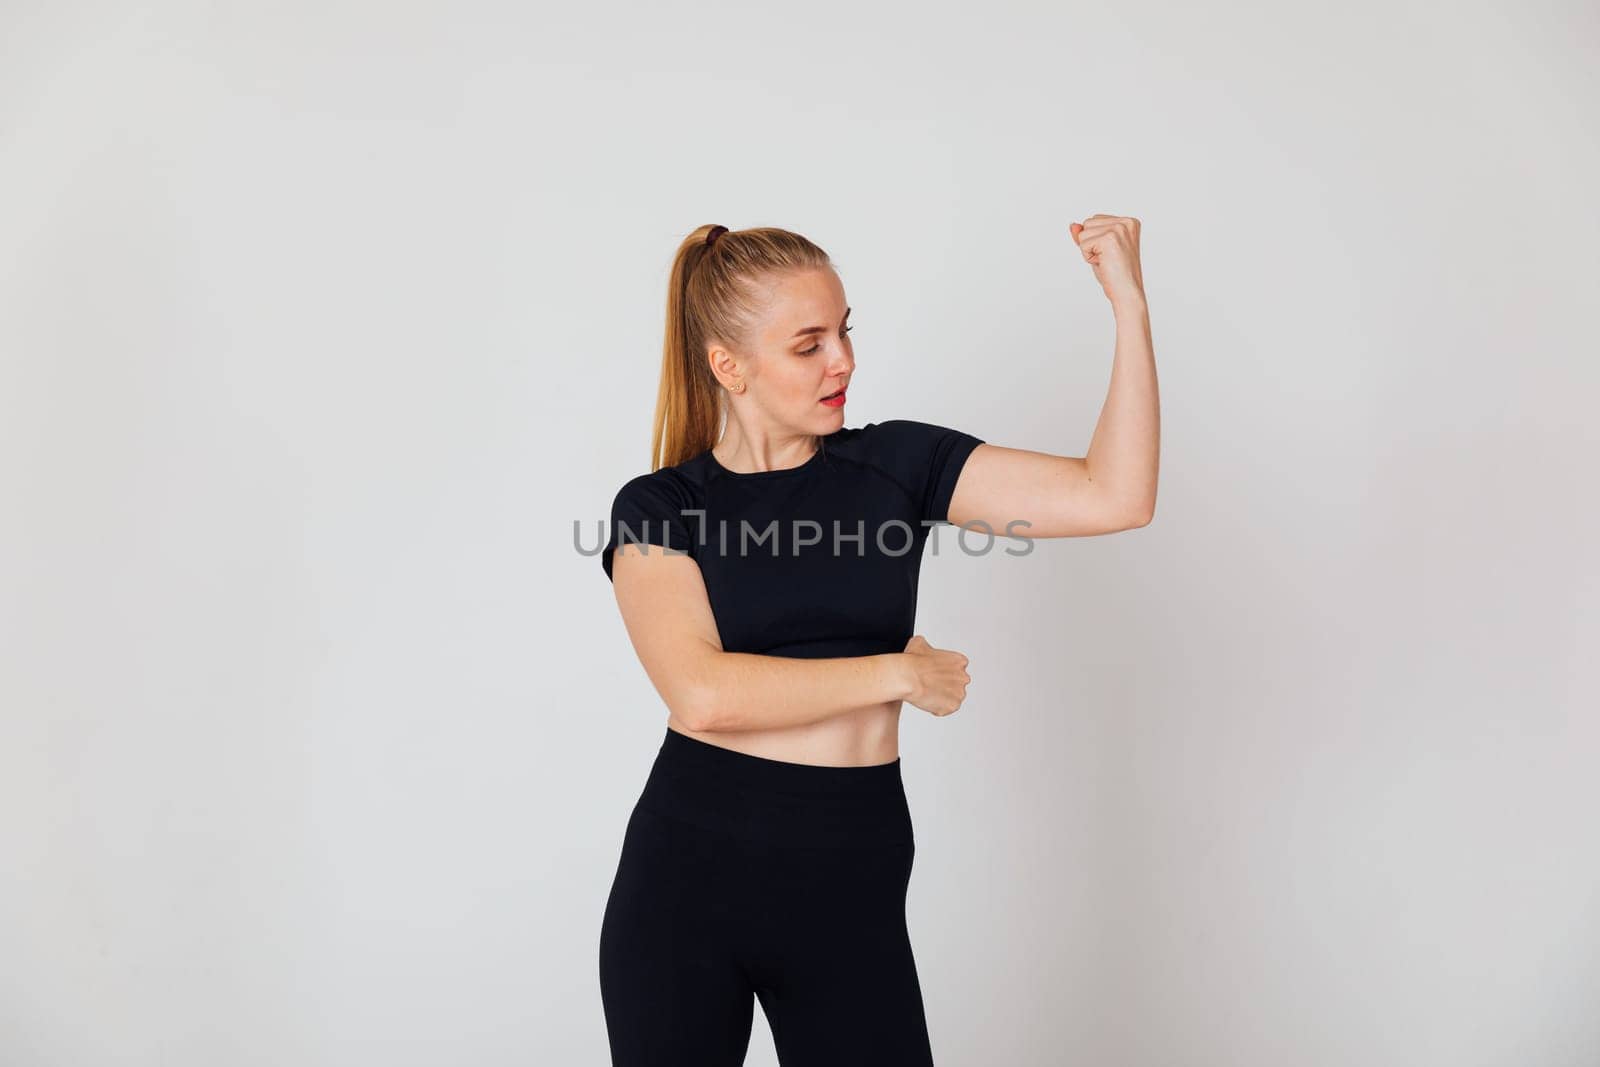 Woman showing biceps on arm on background